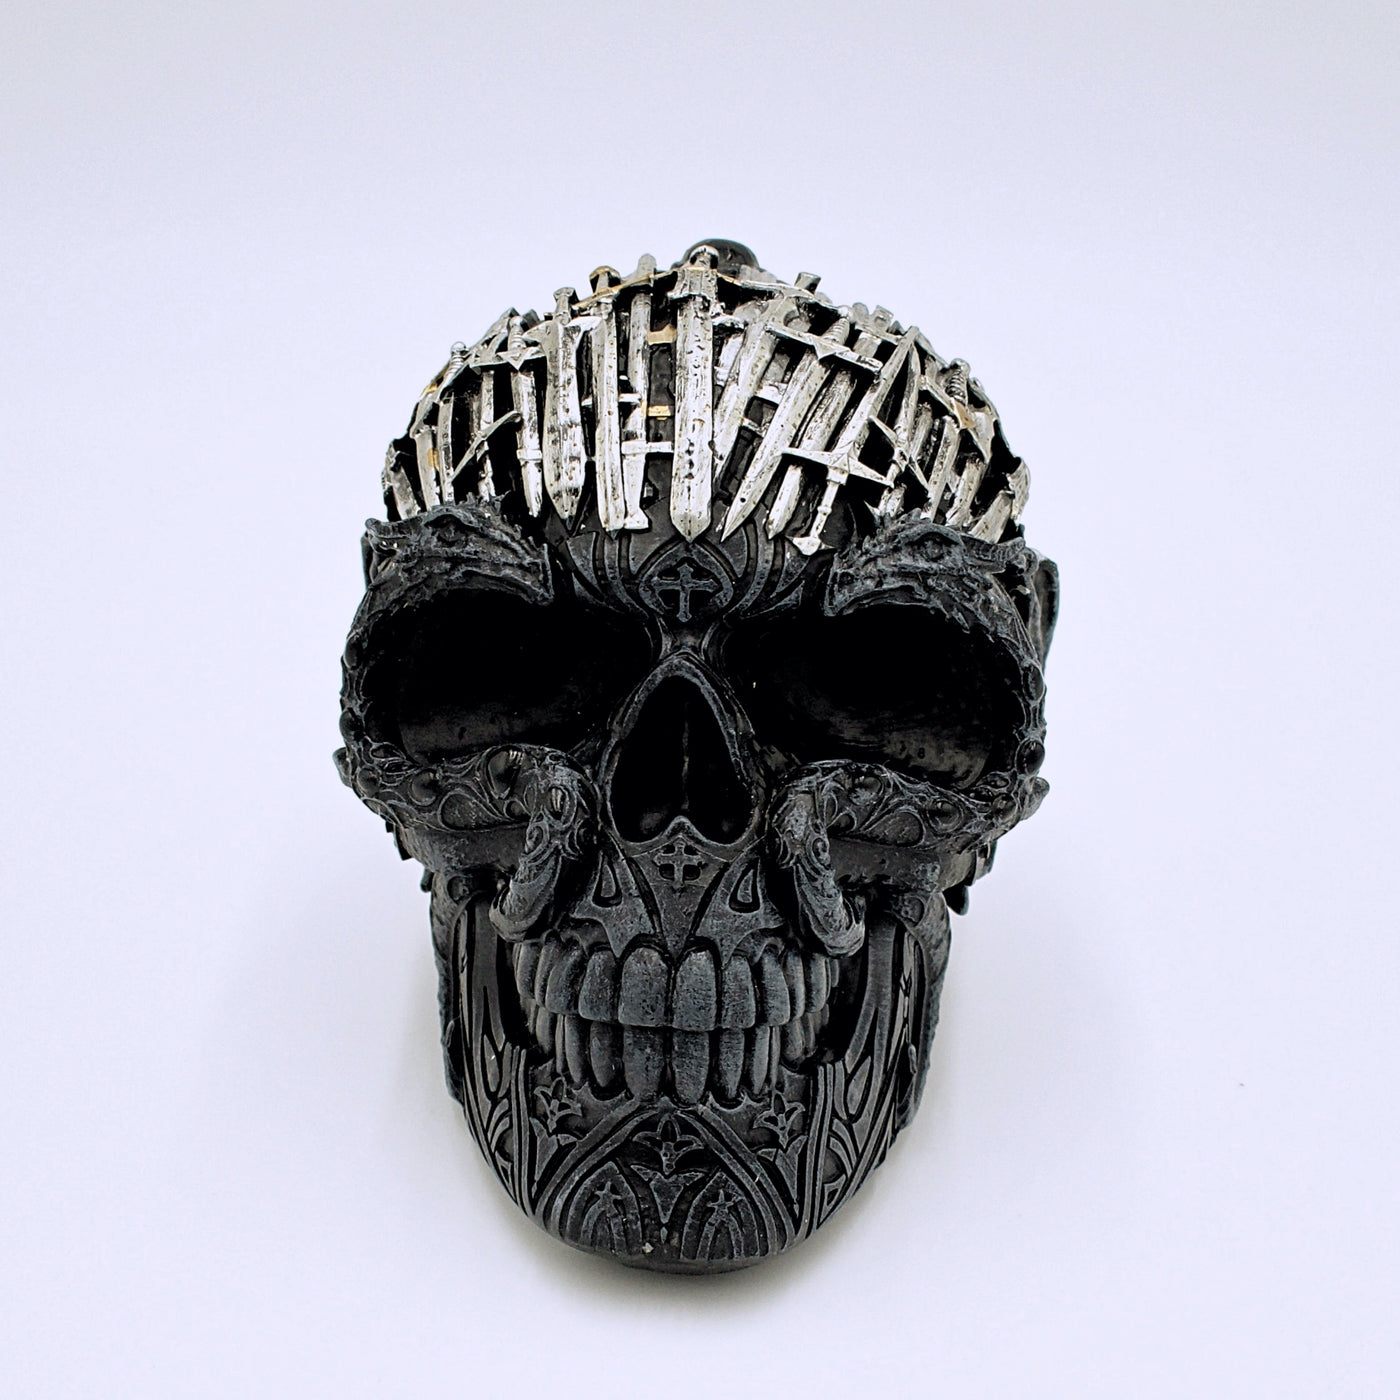 Swords and Dragons Skull Sculpture - The Cranio Collections